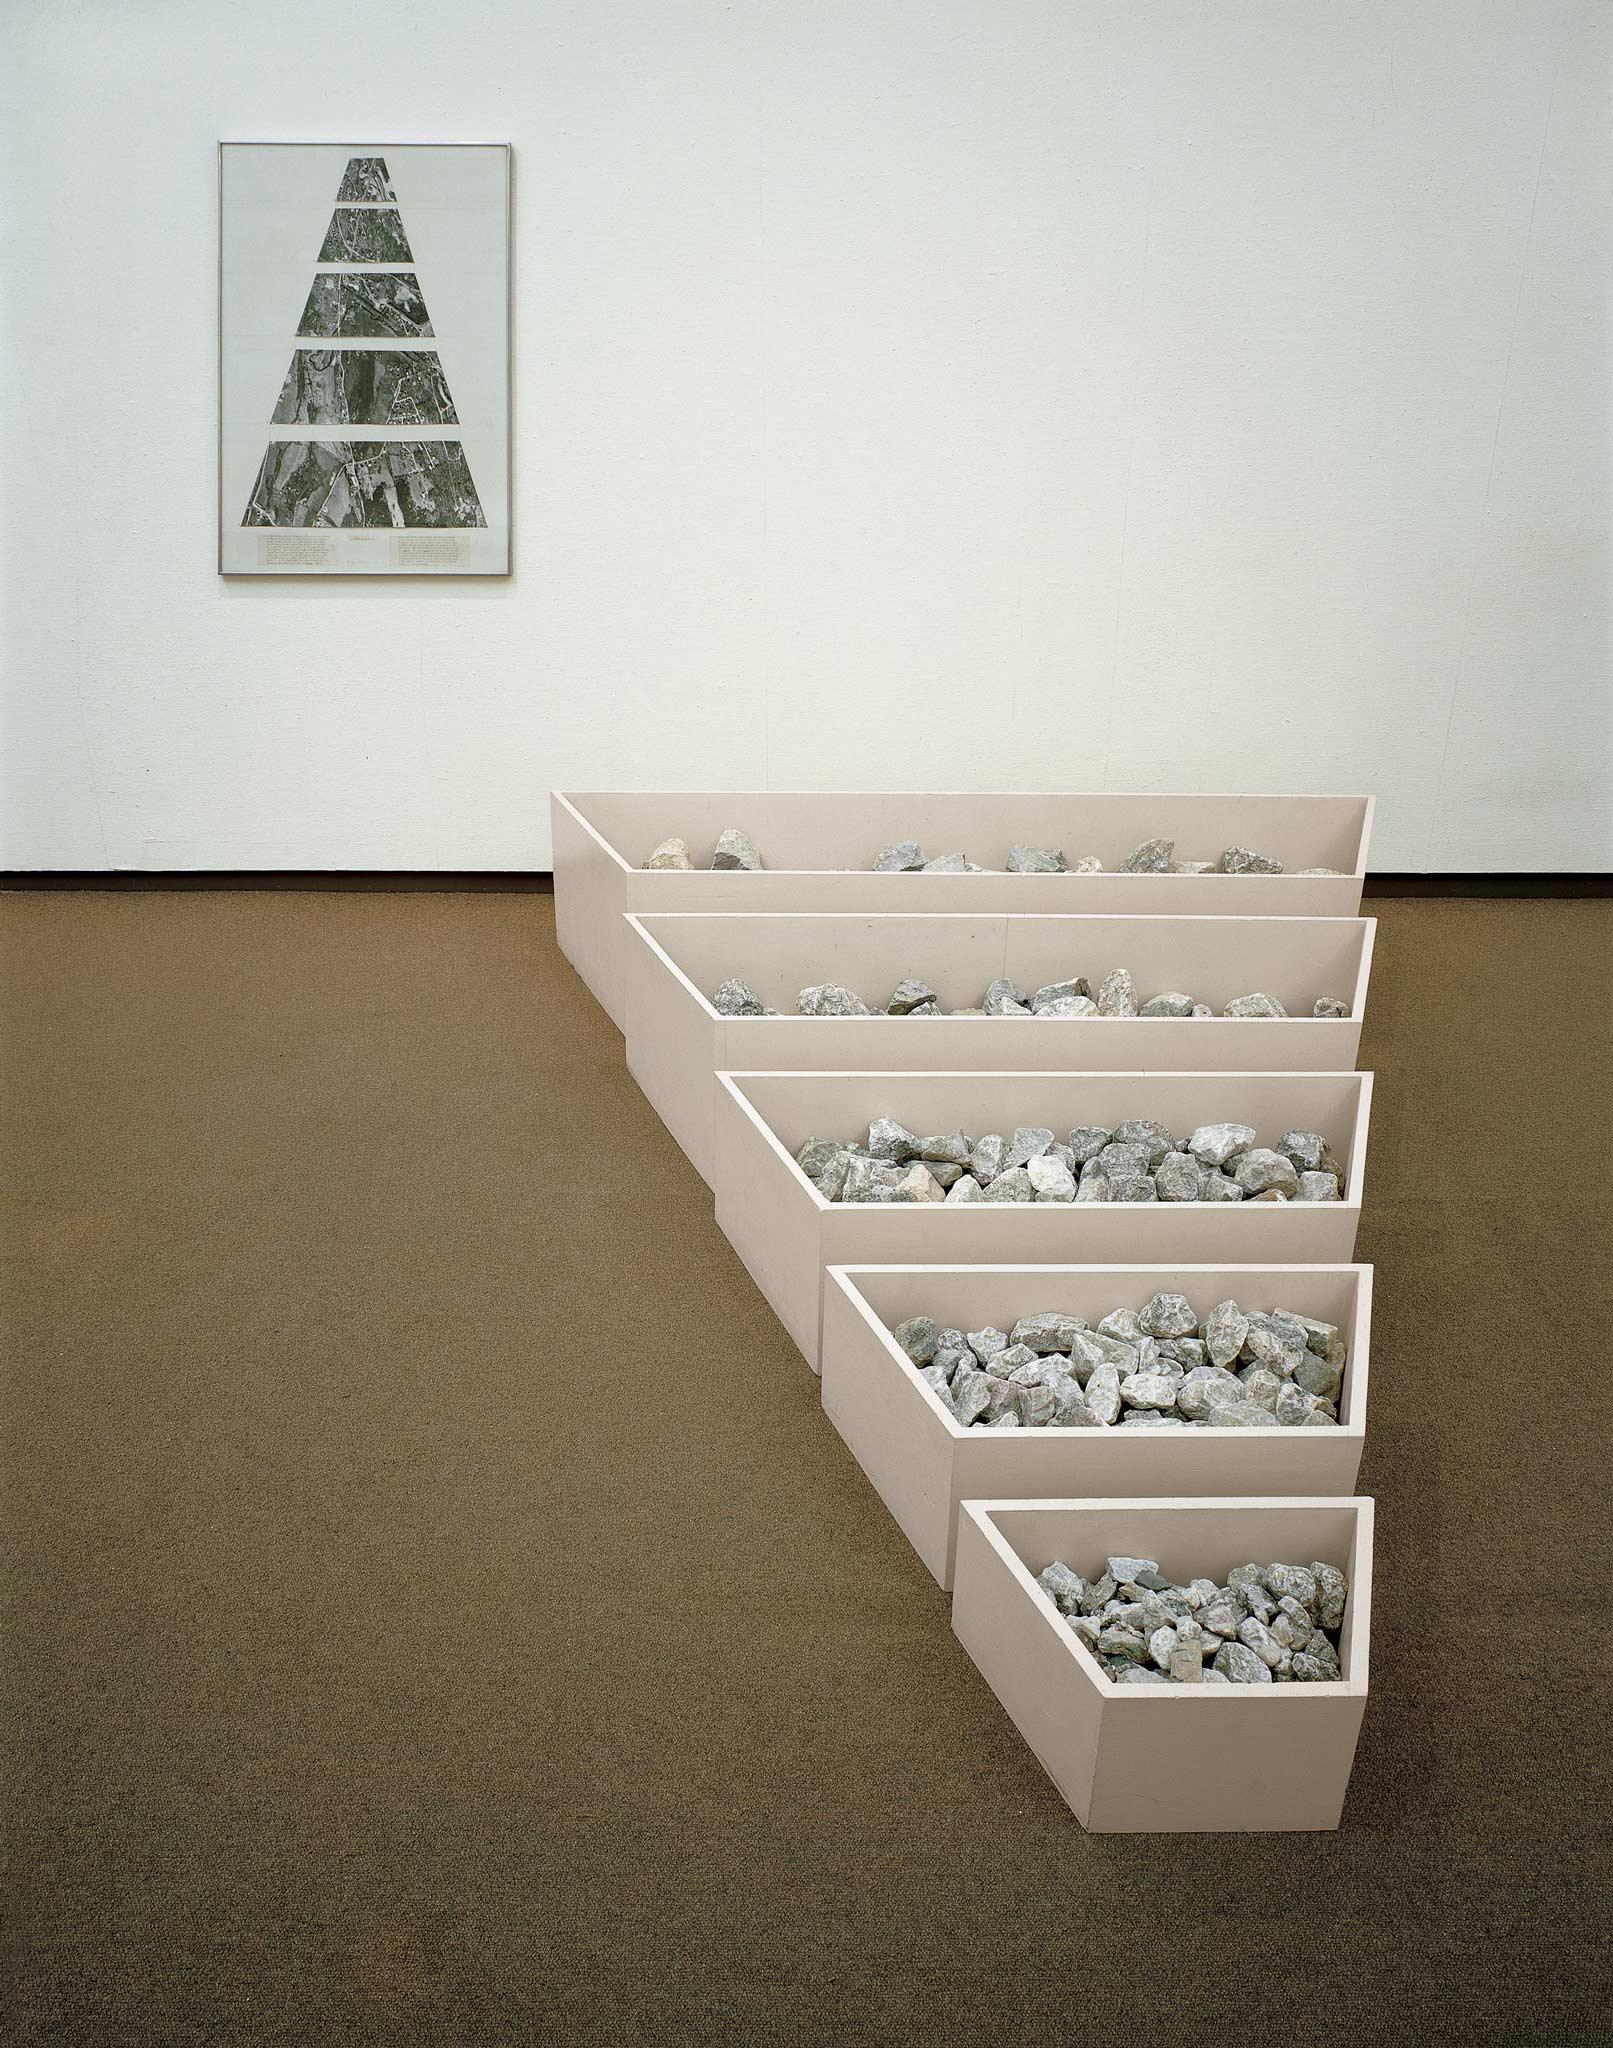 Bin-like structures in which artist Robert Smithson deposited rocks, sand, broken concrete, 
            and other elements he collected  at various sites in New Jersey. Accompanying these sculptures, Smithson hung on gallery 
            walls photographs he’d snapped at the same Garden State locations, as well as fragments of maps that could lead other people 
            to these places